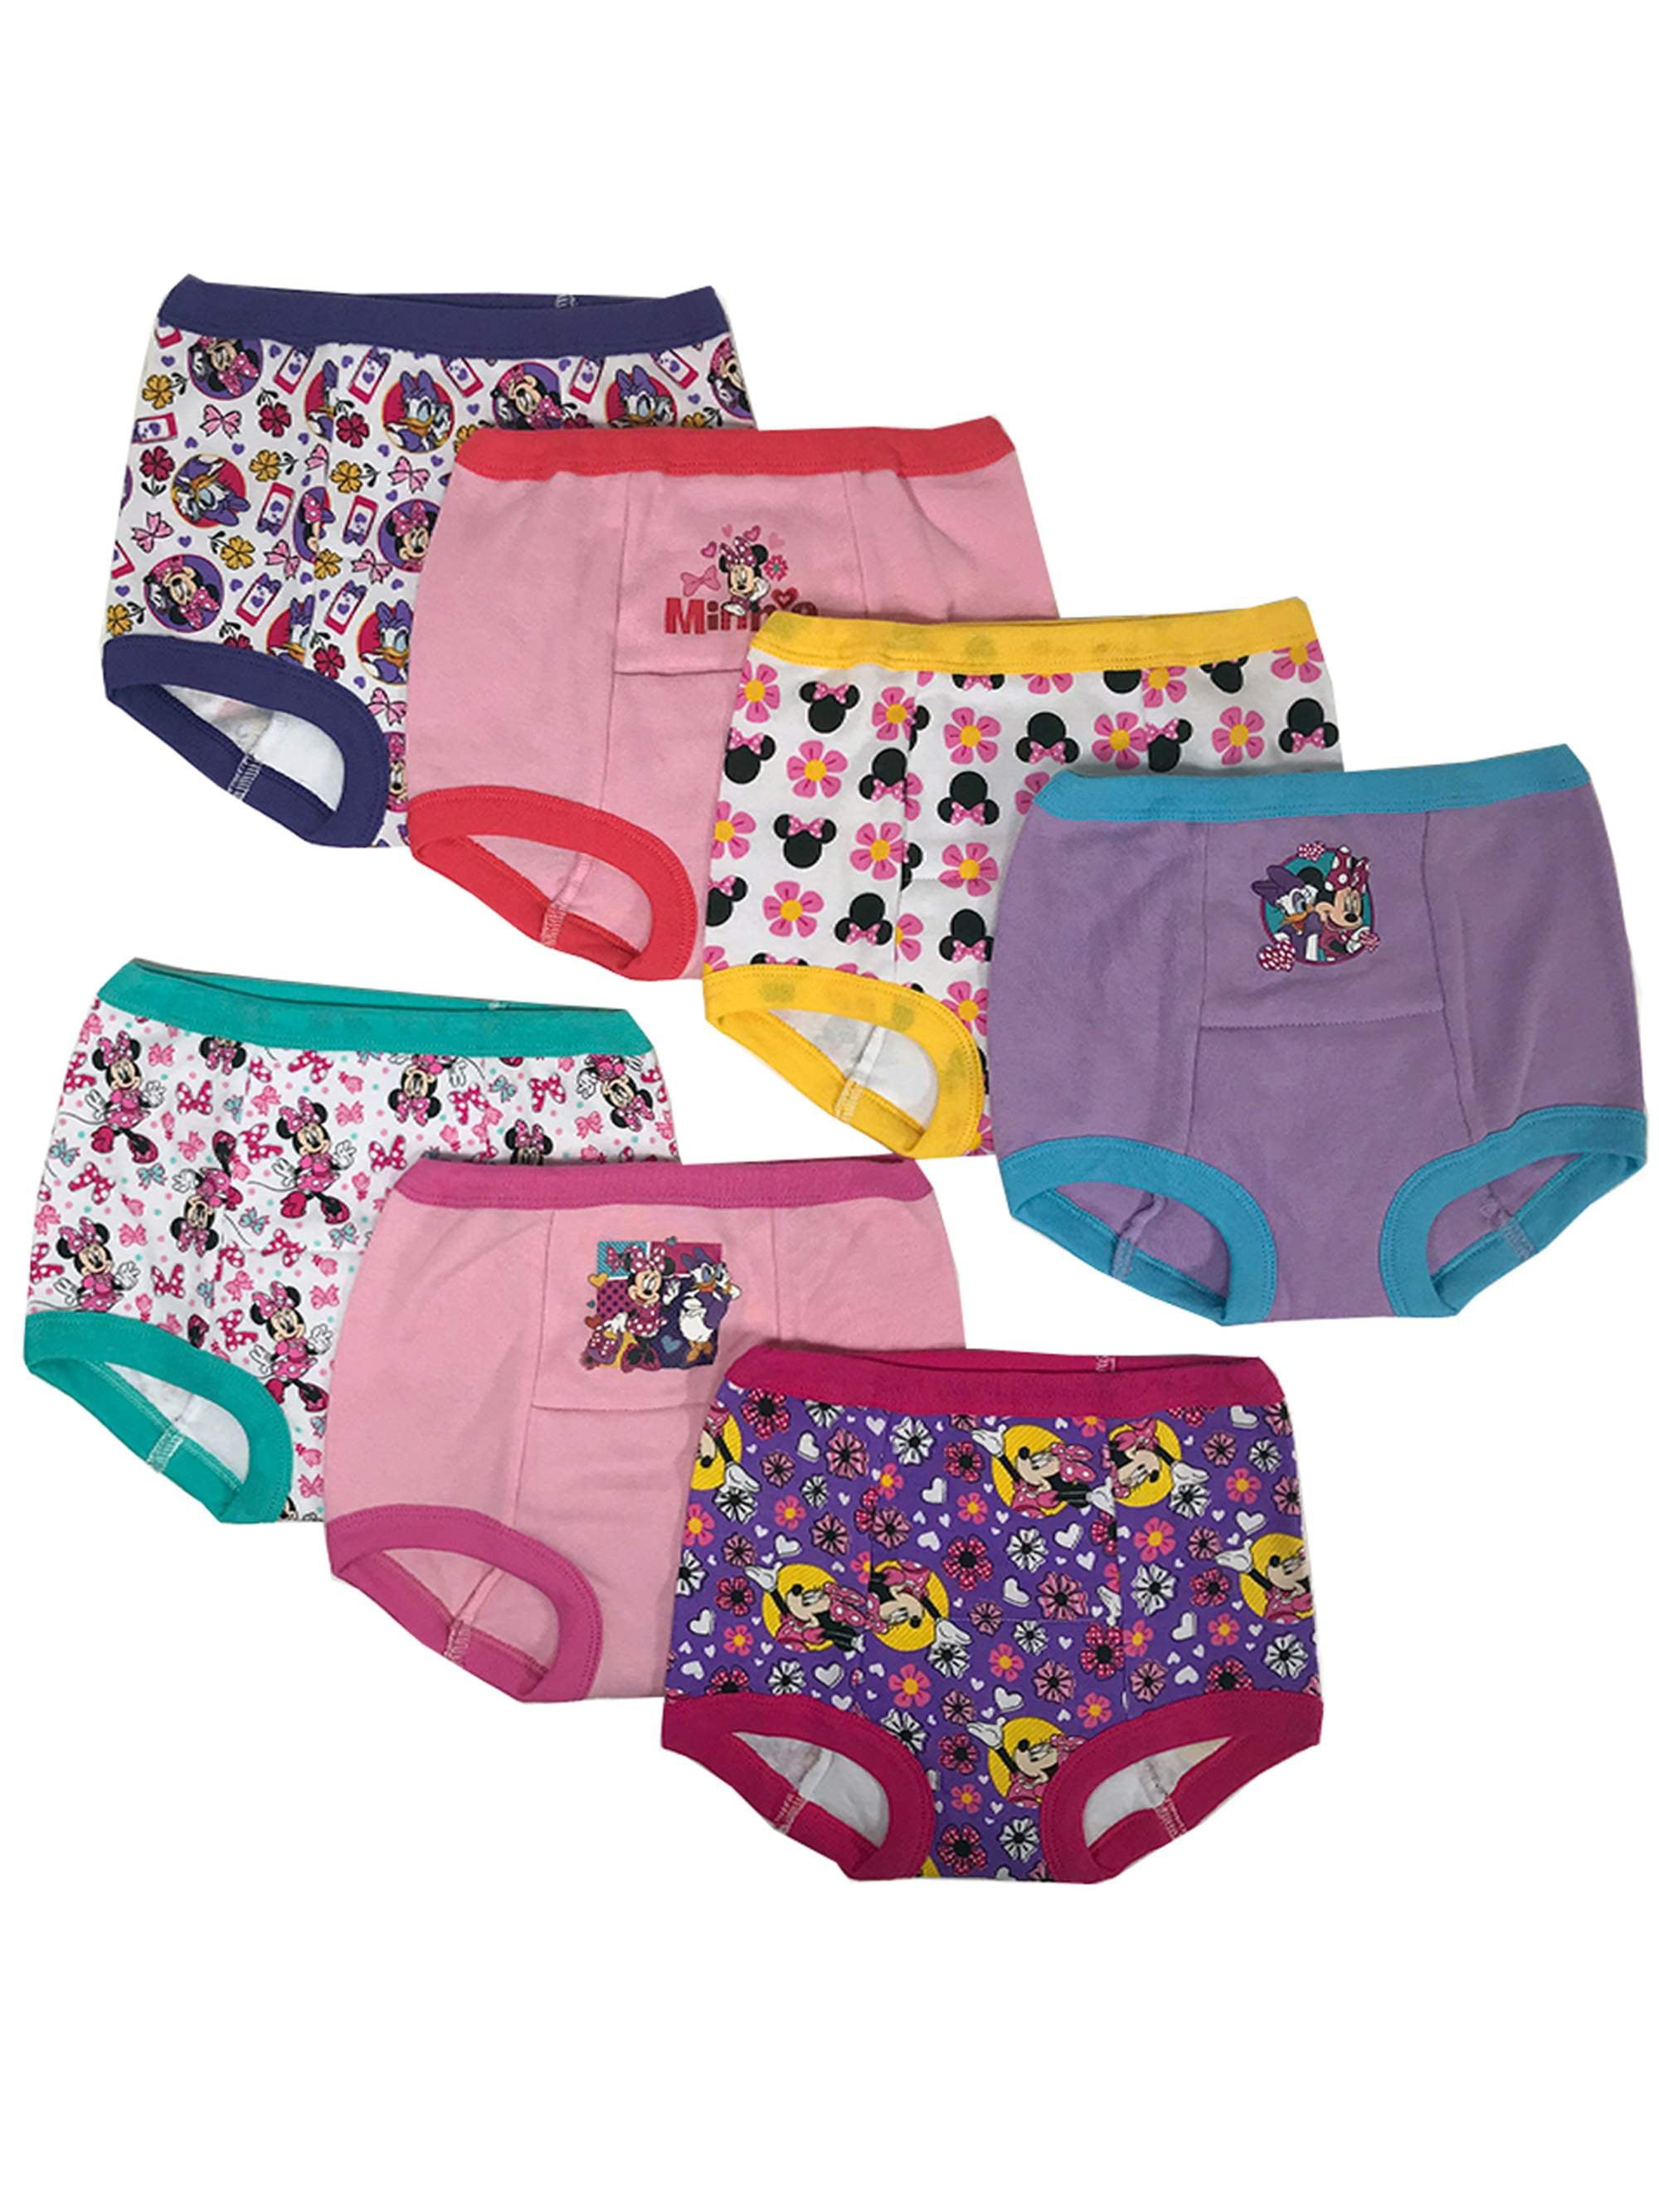 Disney Girls' Minnie Mouse Potty Training Pants and Starter Kit with  Stickers & Tracking Chart in Sizes 18m, 2t, 3t, 4t